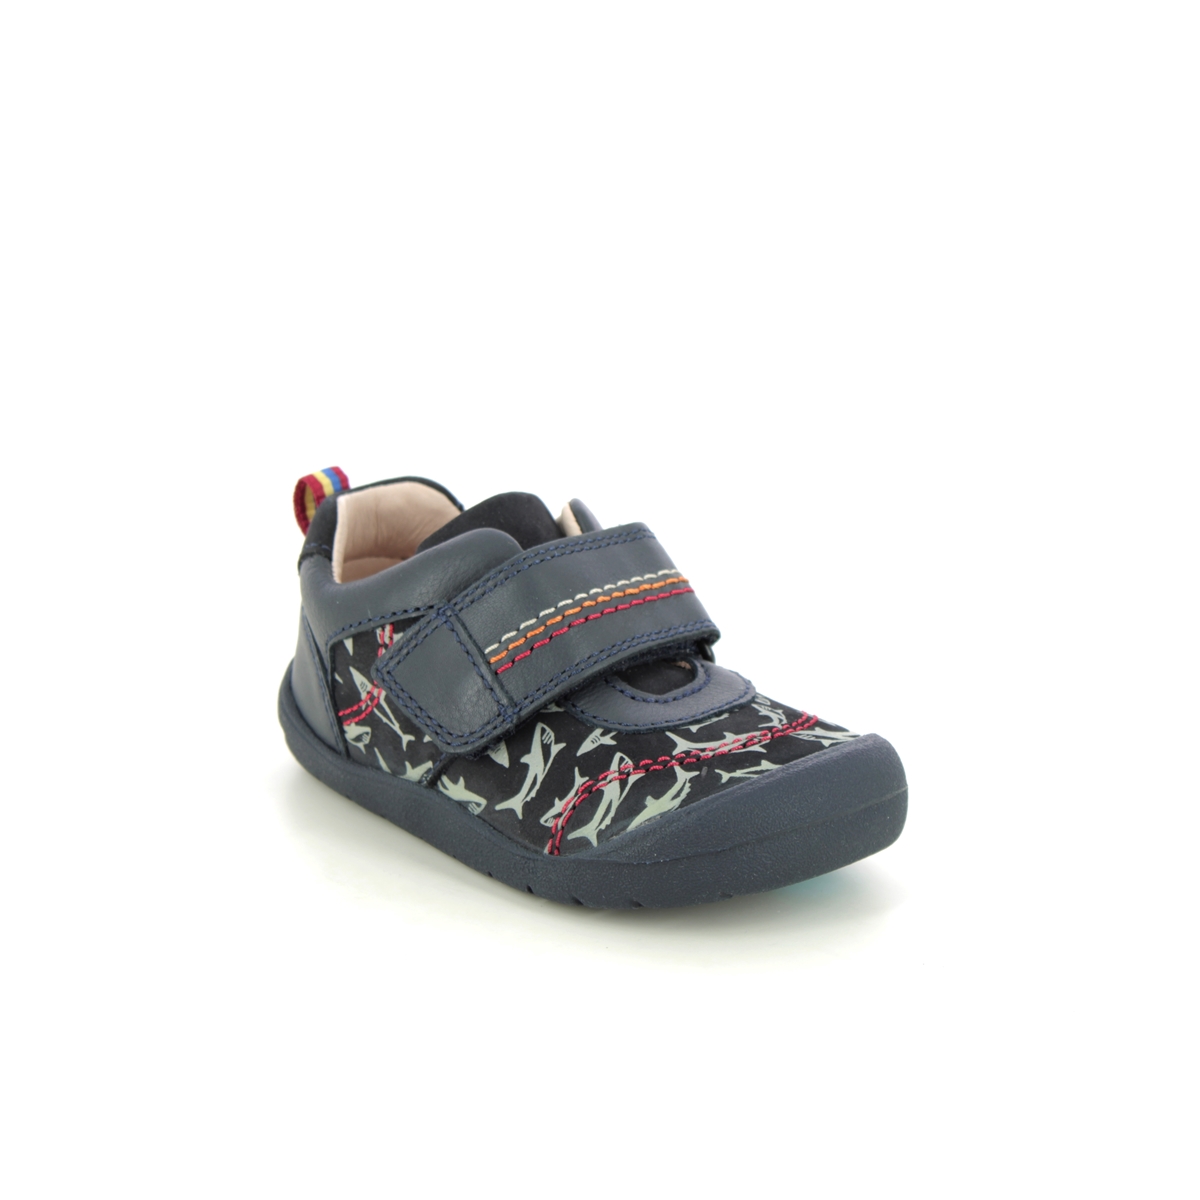 Start Rite - Jaws In Navy Nubuck 0782-97G In Size 4.5 In Plain Navy Nubuck Boys First And Toddler Shoes  In Navy Nubuck For kids